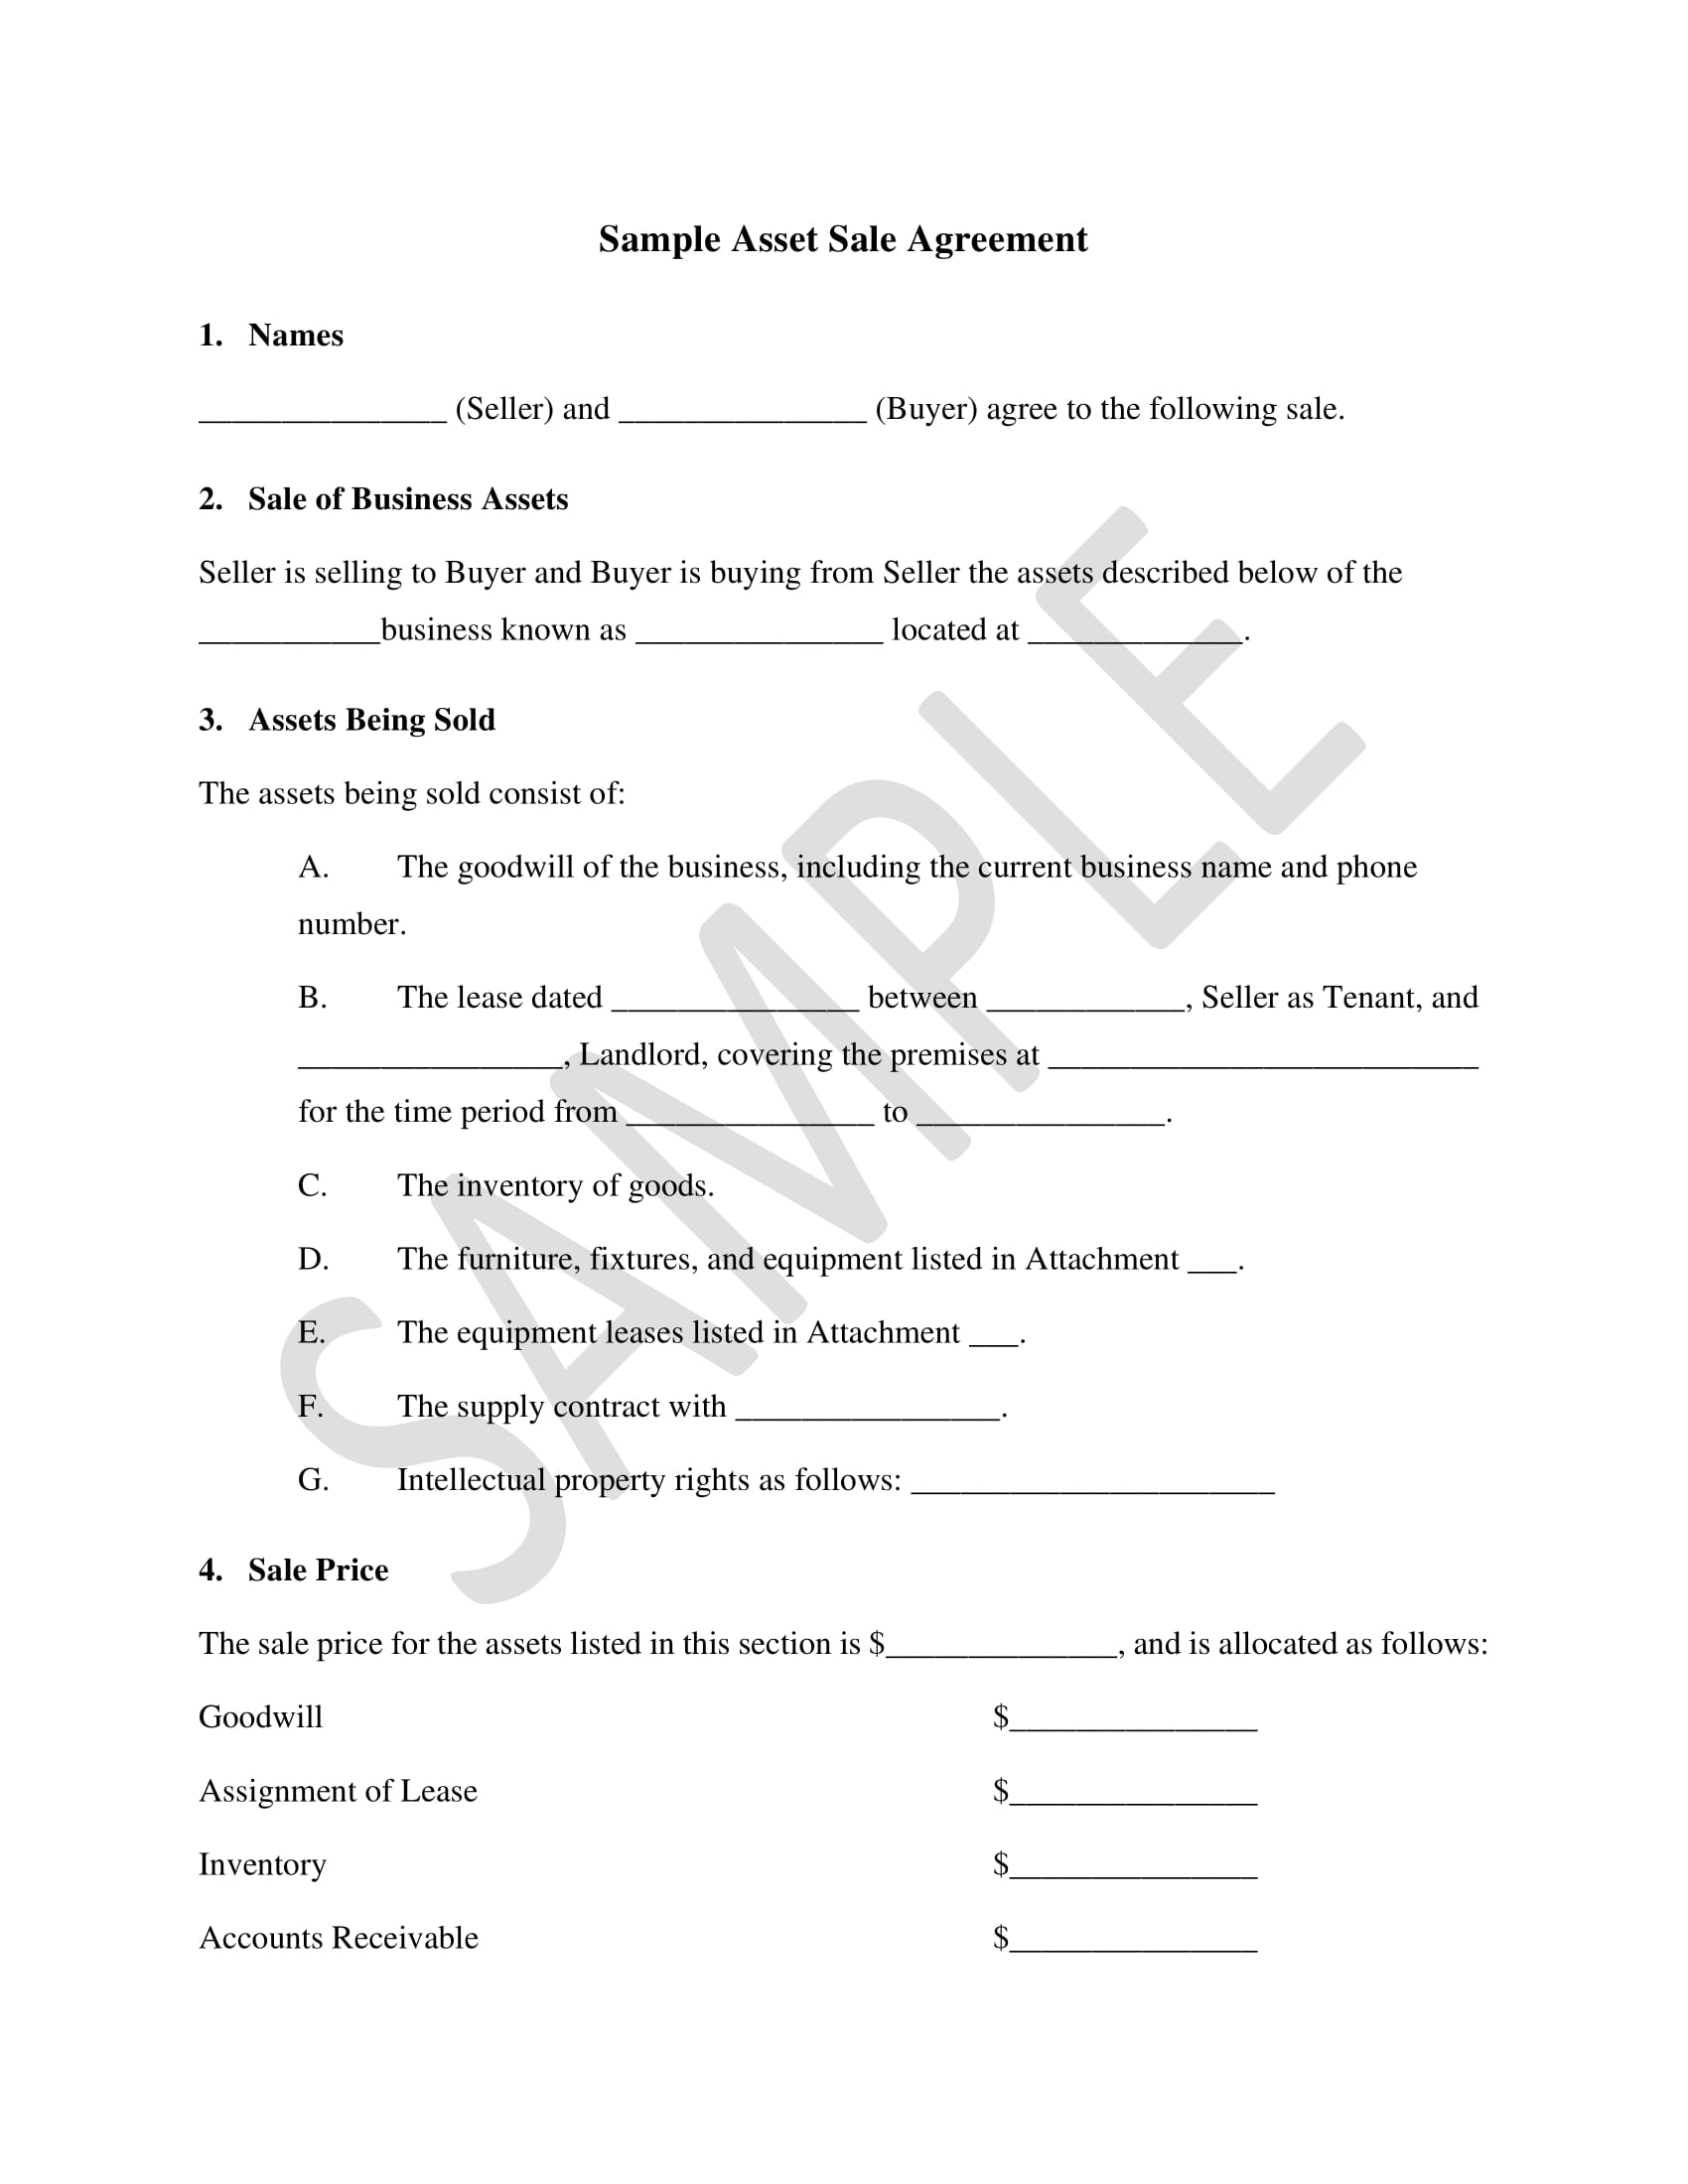 business asset sale agreement contract form 1